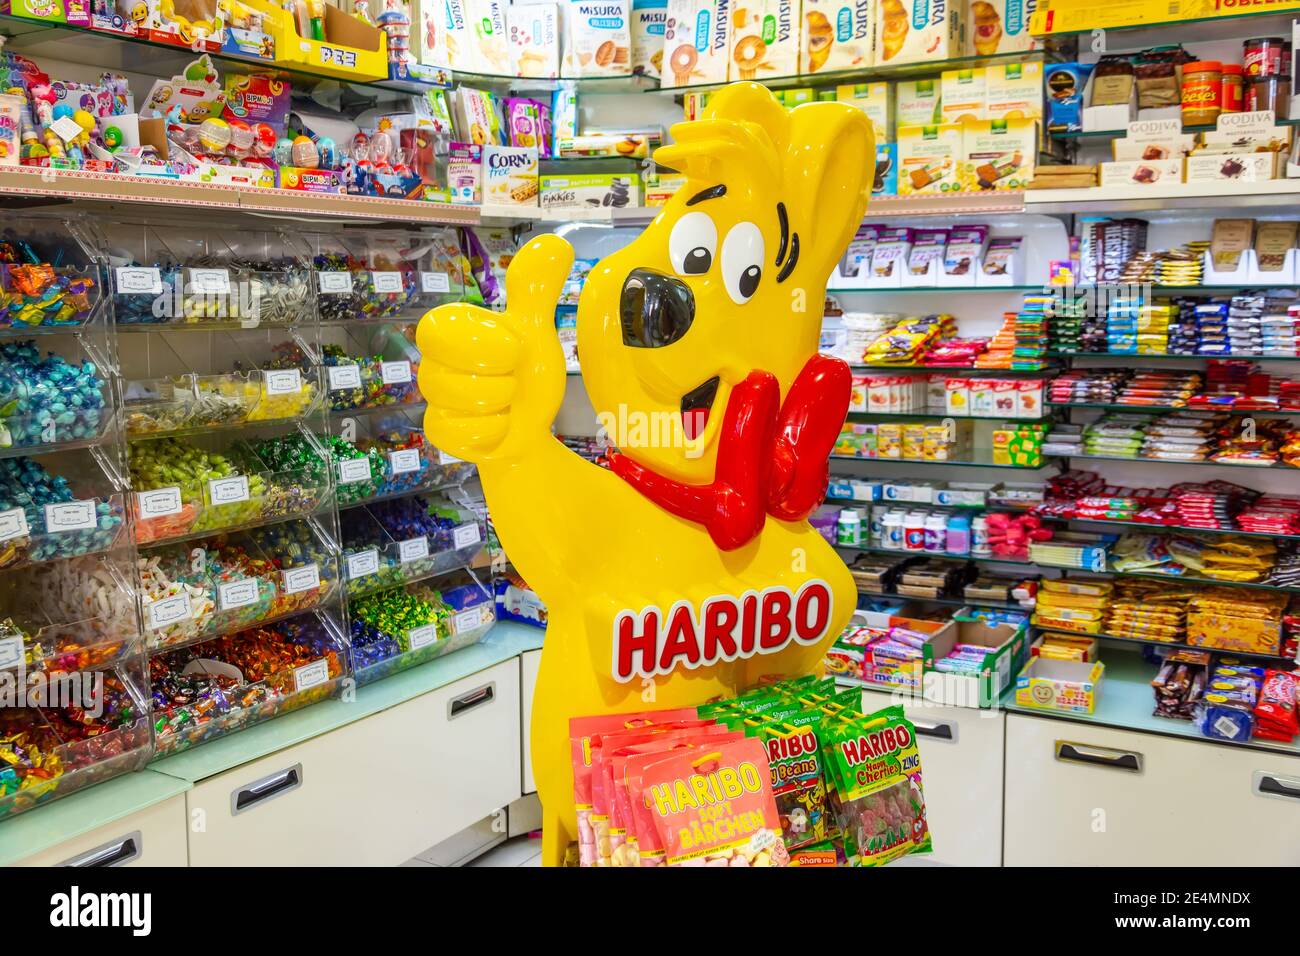 Haribo Gold Bear. A soft, chewy, gummy cnady in a variety of fruit flavors. Malta, Valletta, 15 may 2019 Stock Photo